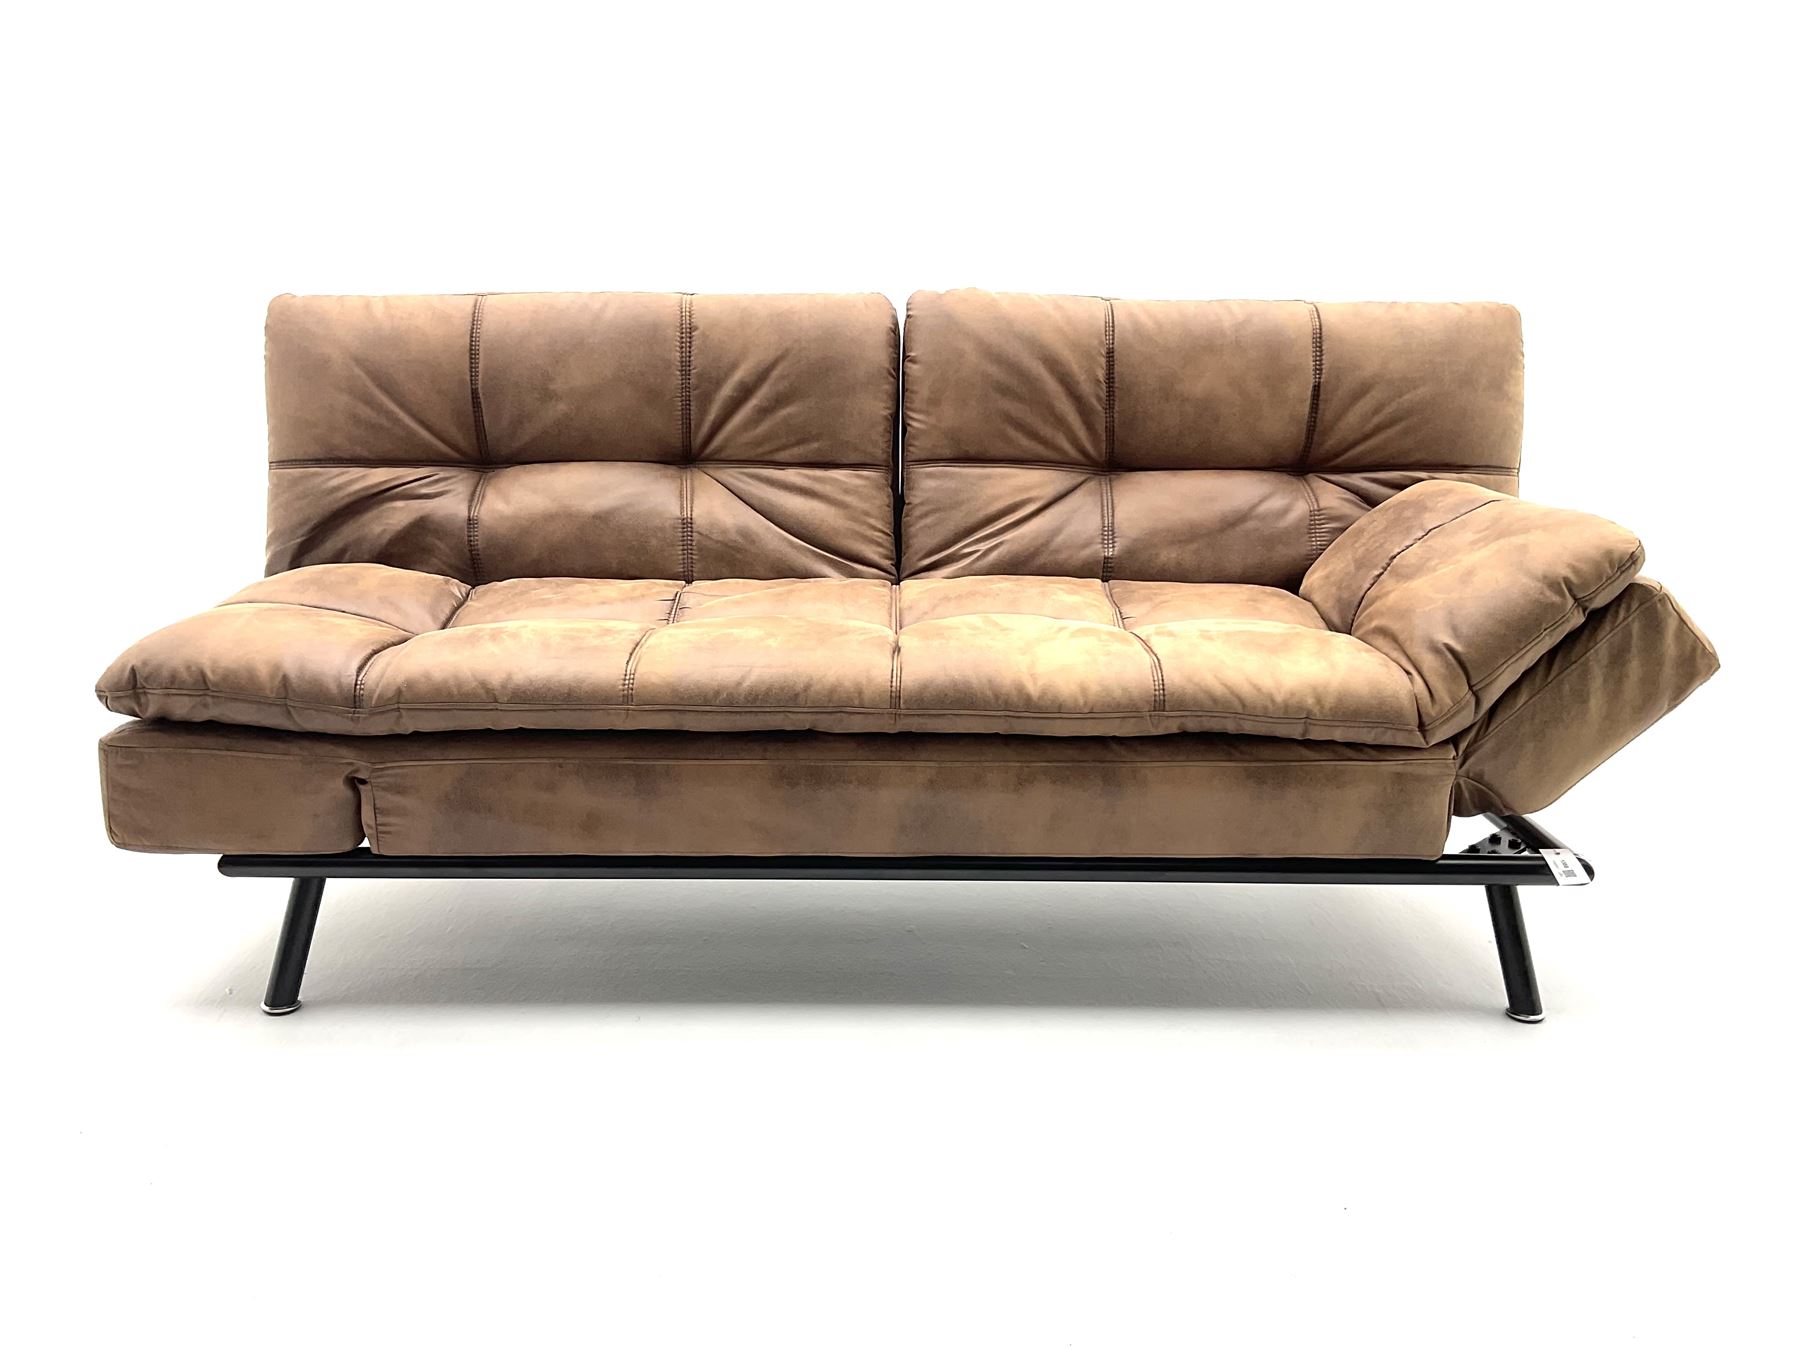 Sleepmasters Texas sofa bed - upholstered in brown faux leather